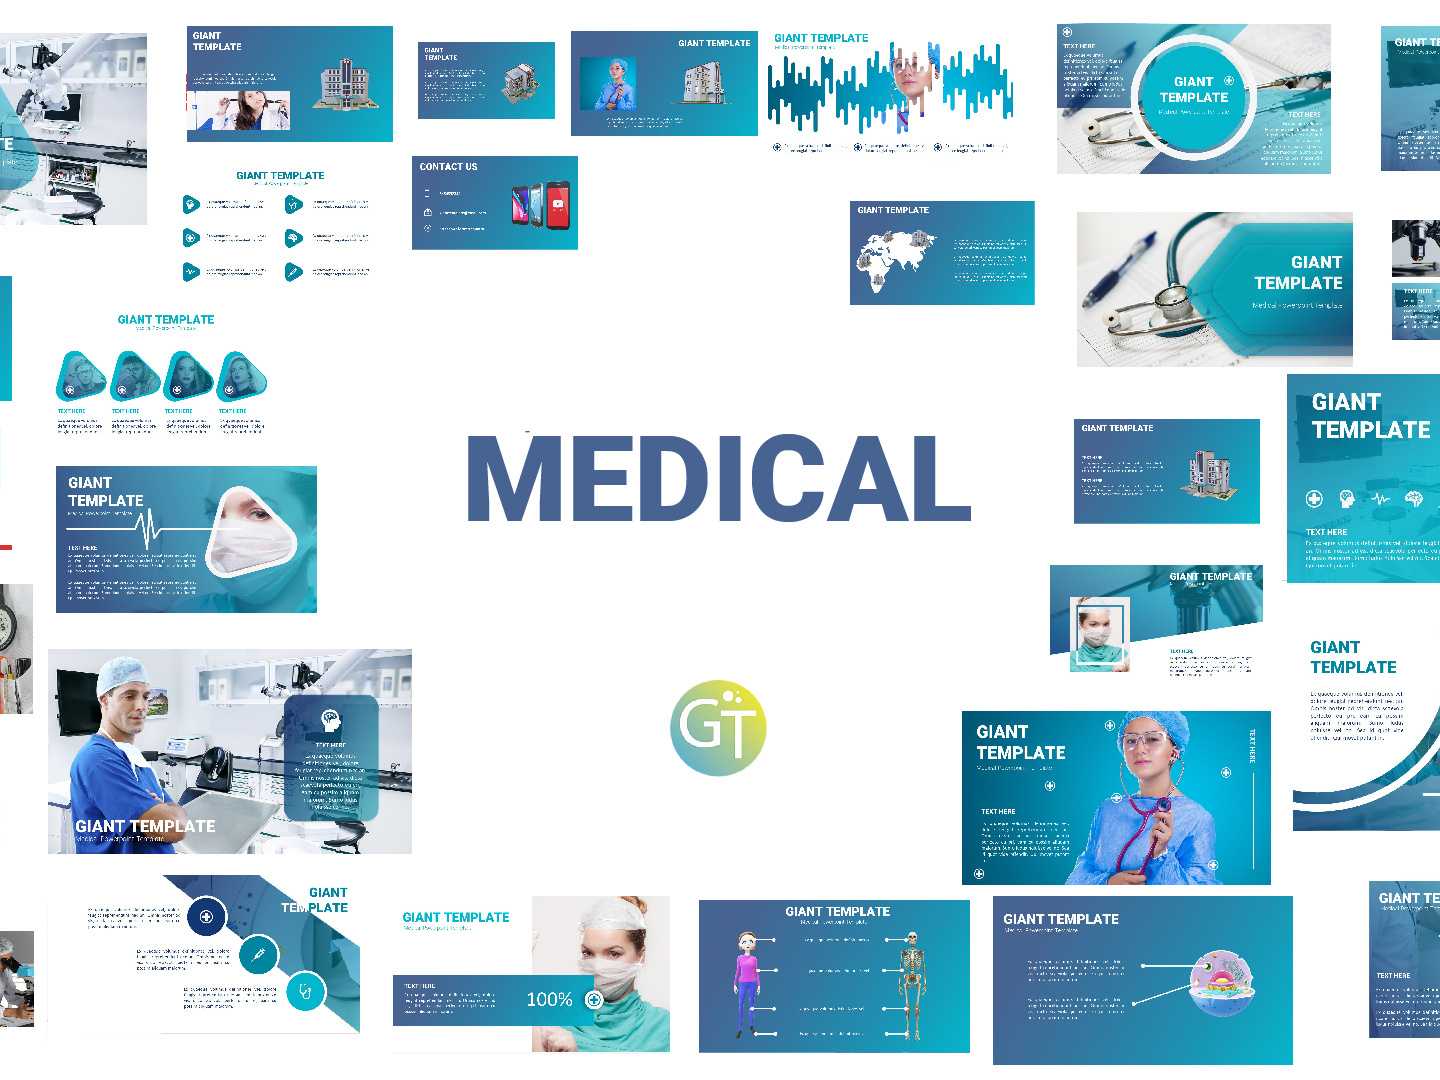 Medical Powerpoint Templates Free Downloadgiant Template Inside Powerpoint Animation Templates Free Download